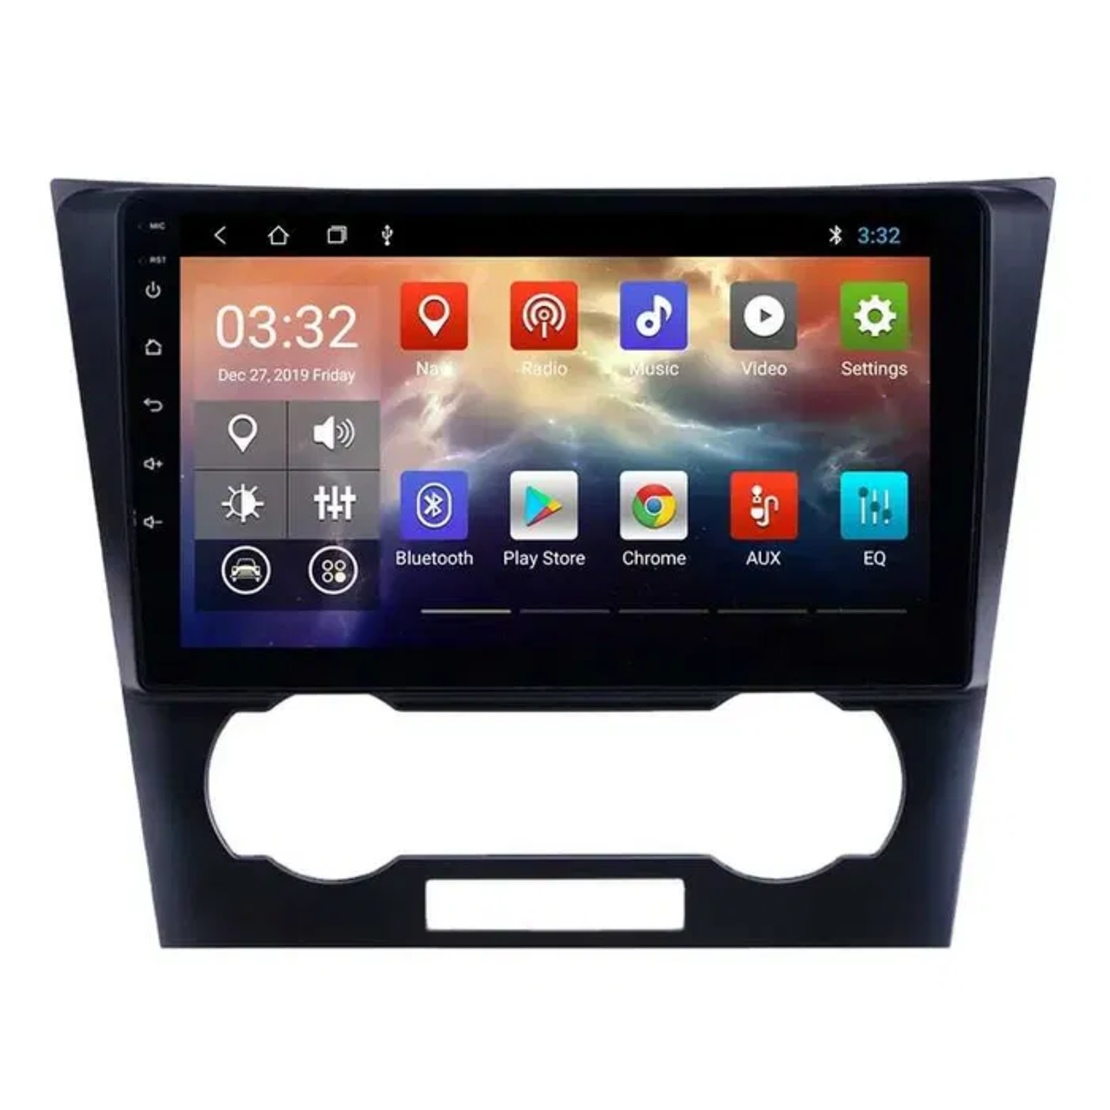 Chevrolet Epica 2006 - 2012 Android Multimedia/Navigation